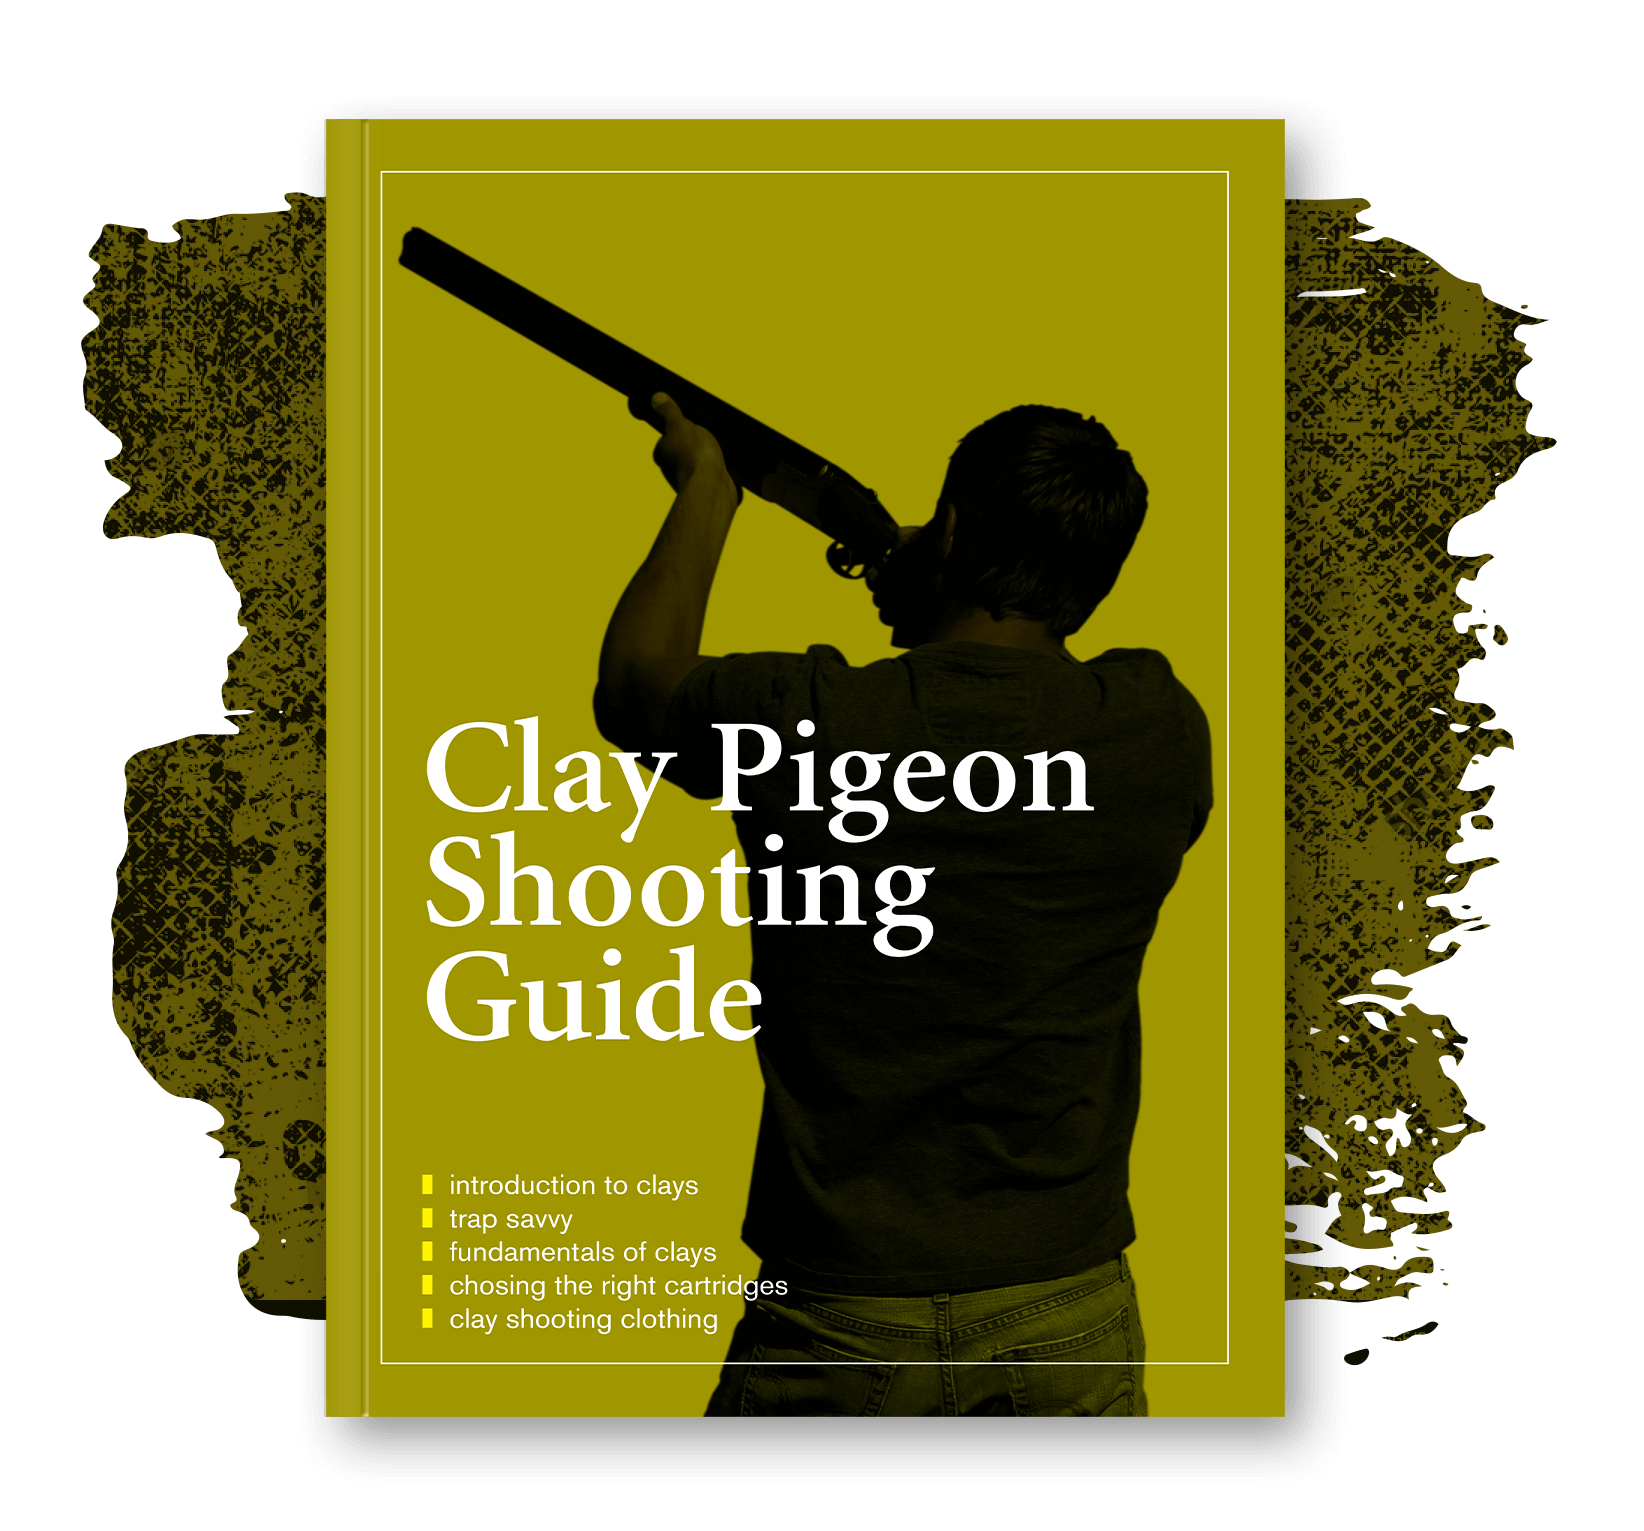 Clay pigeon shooting guide